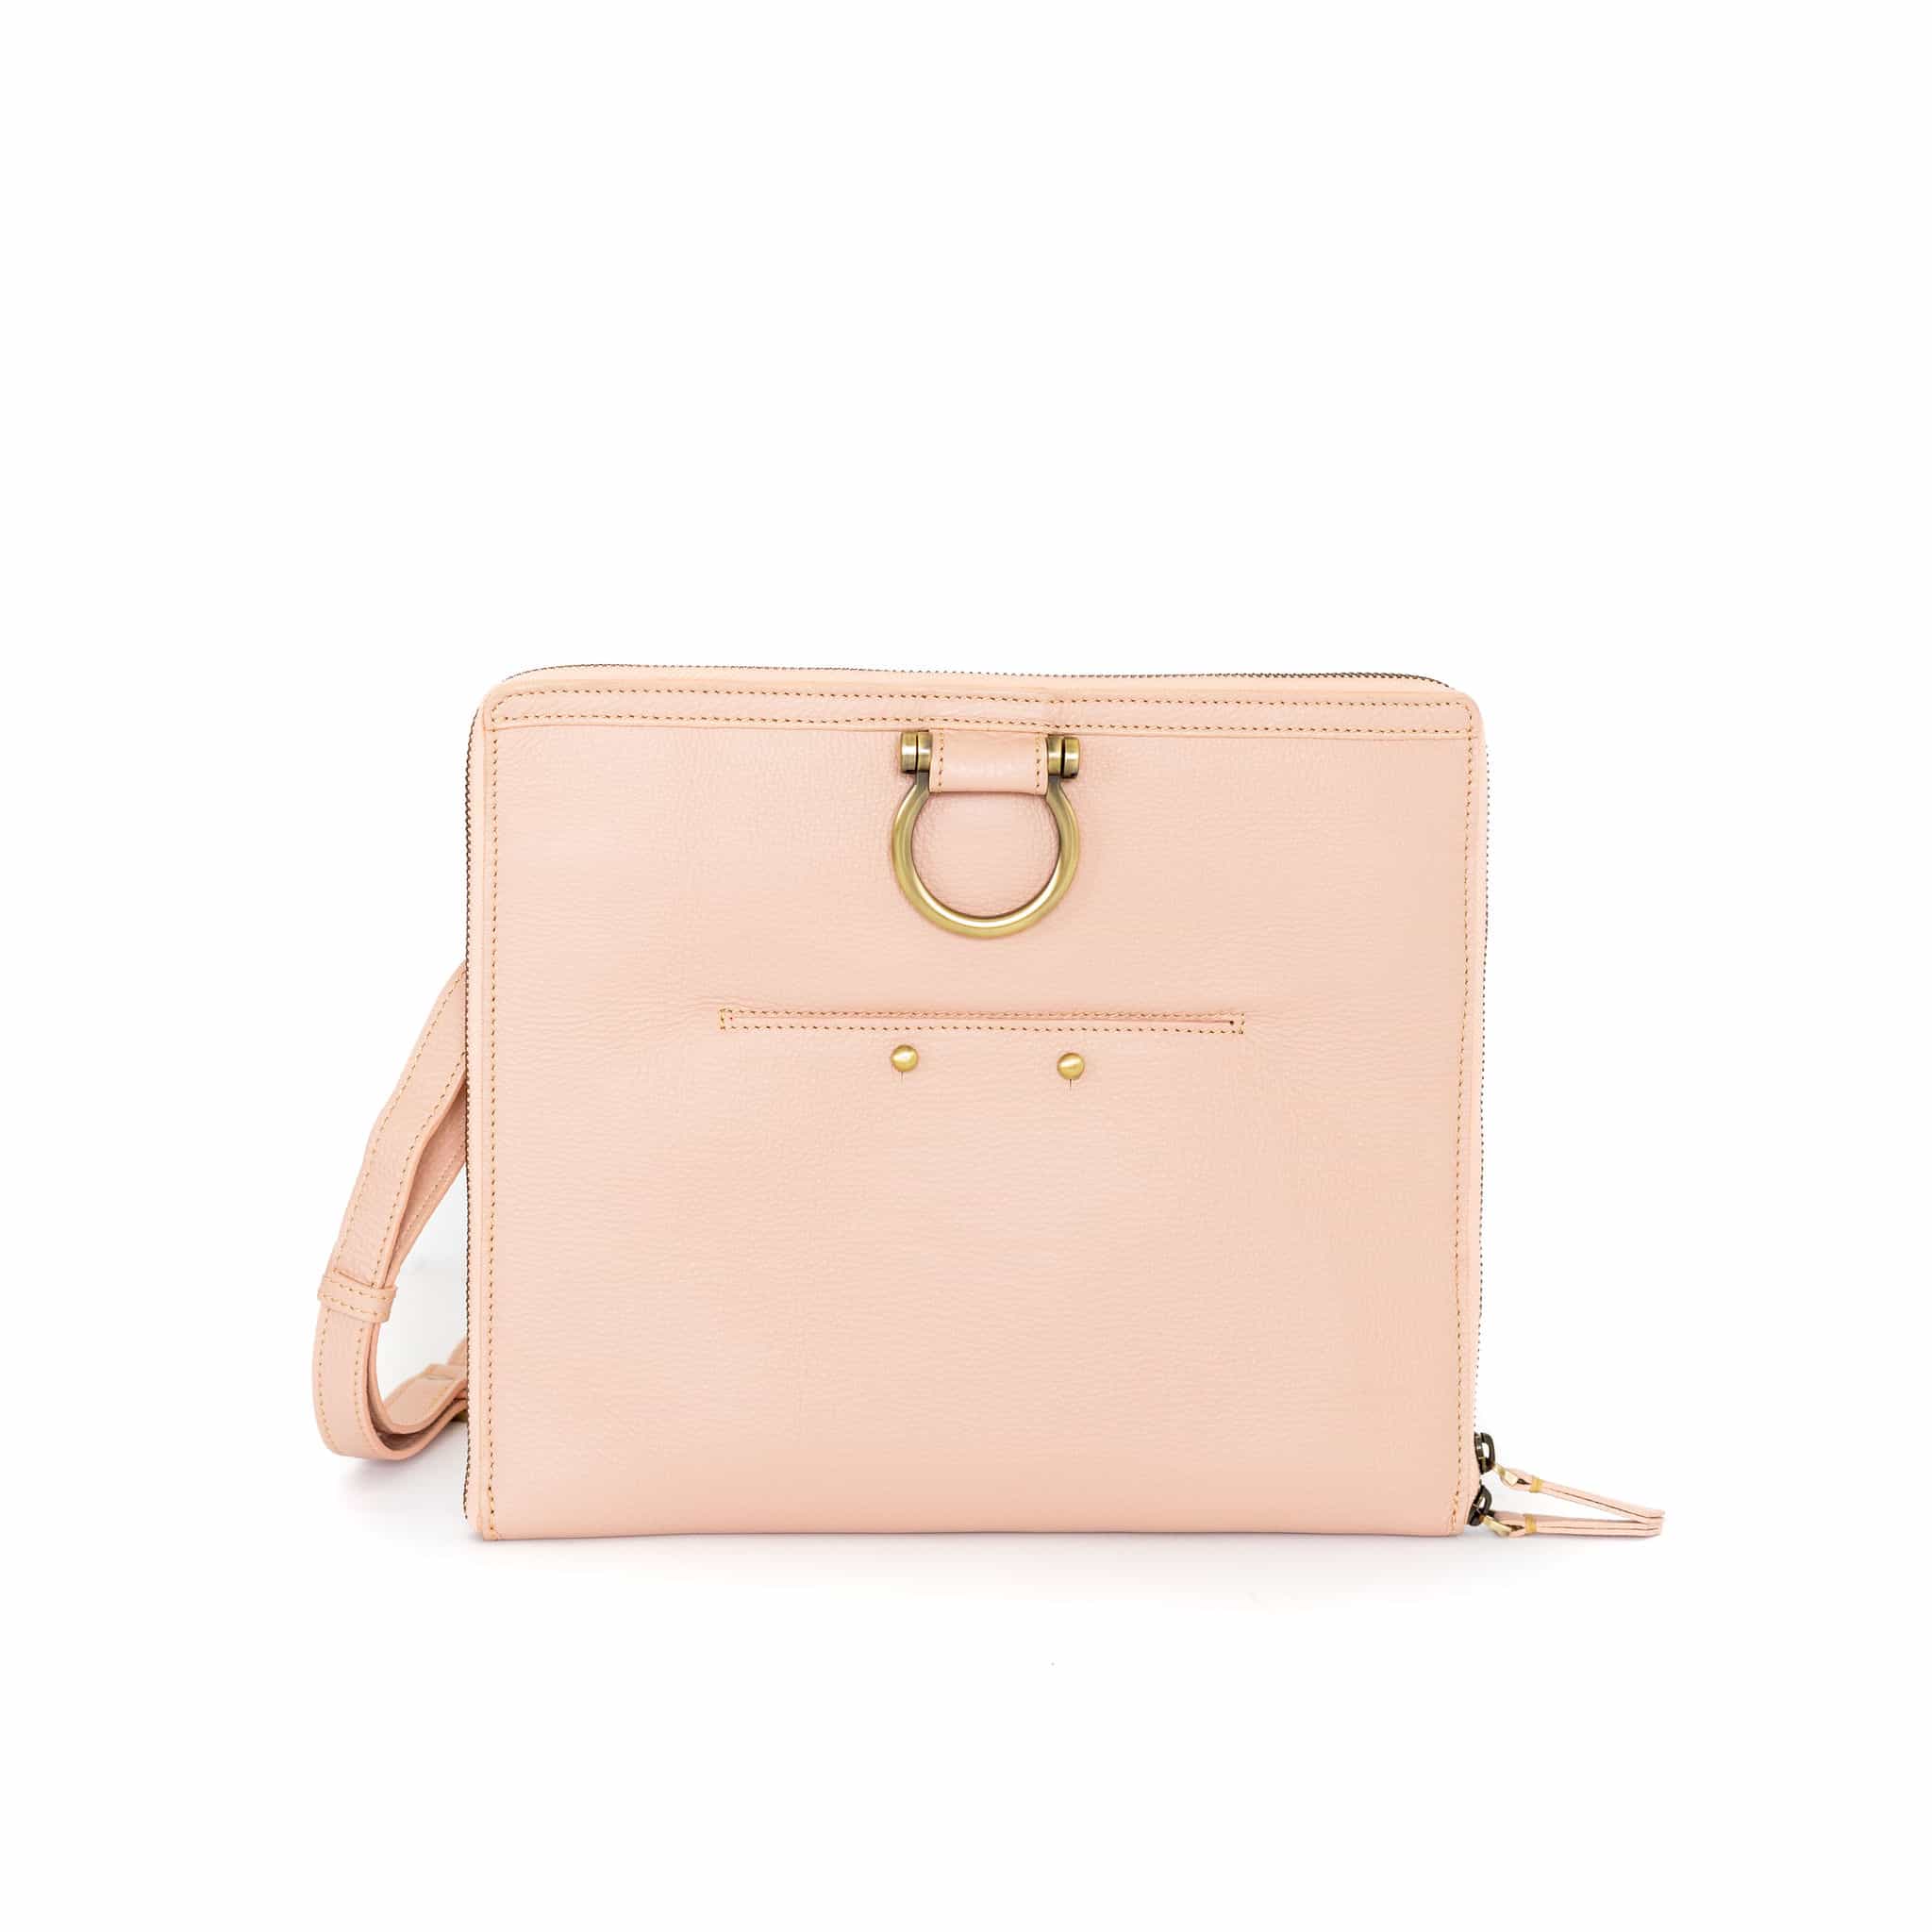 Women's MZ Wallace Crossbody bags and purses from C$183 | Lyst Canada